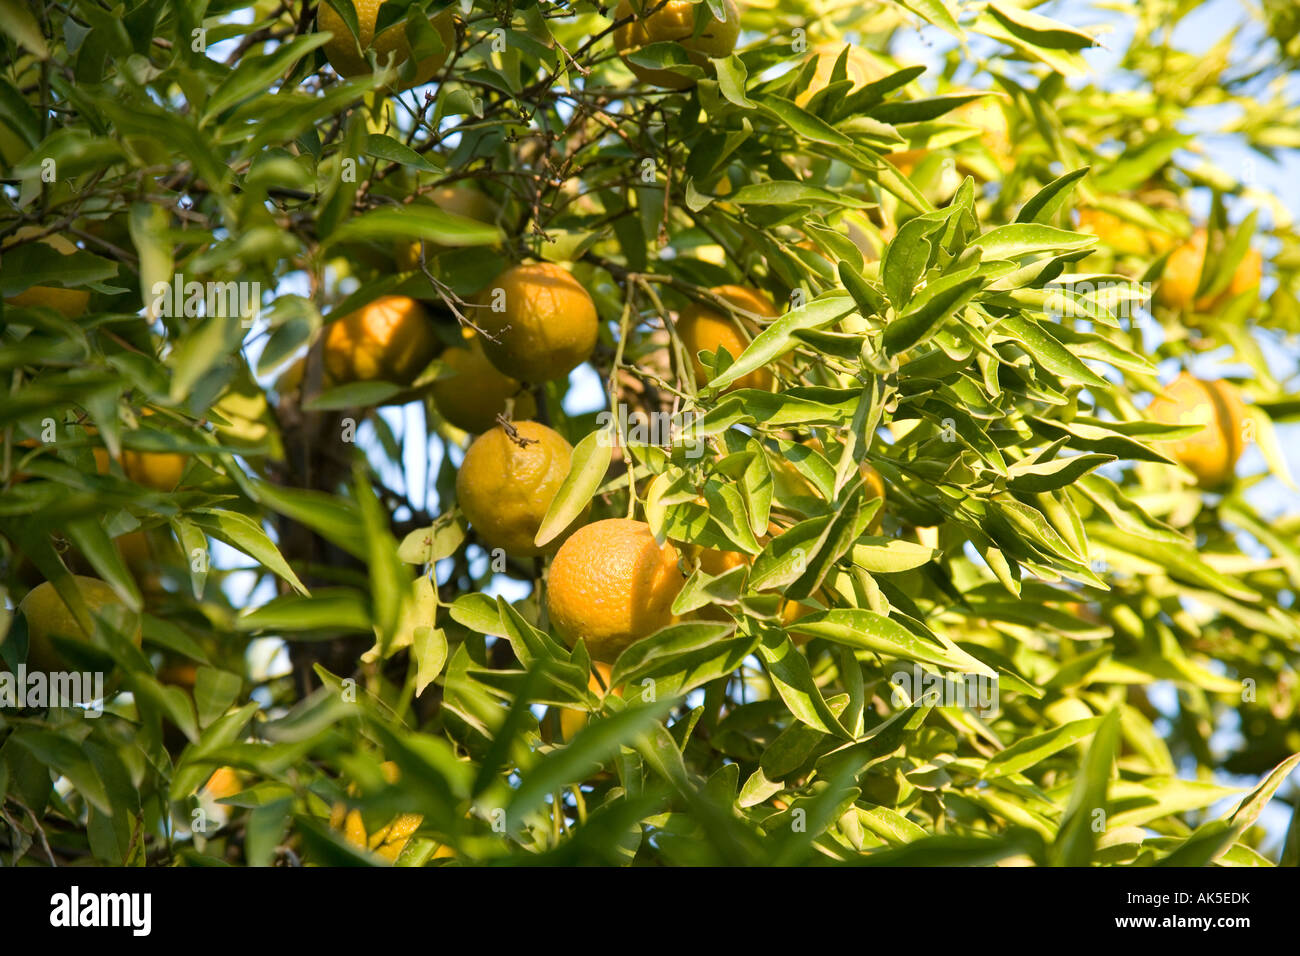 Oranges growing on the tree Marrakech, Morocco, North Africa. Stock Photo